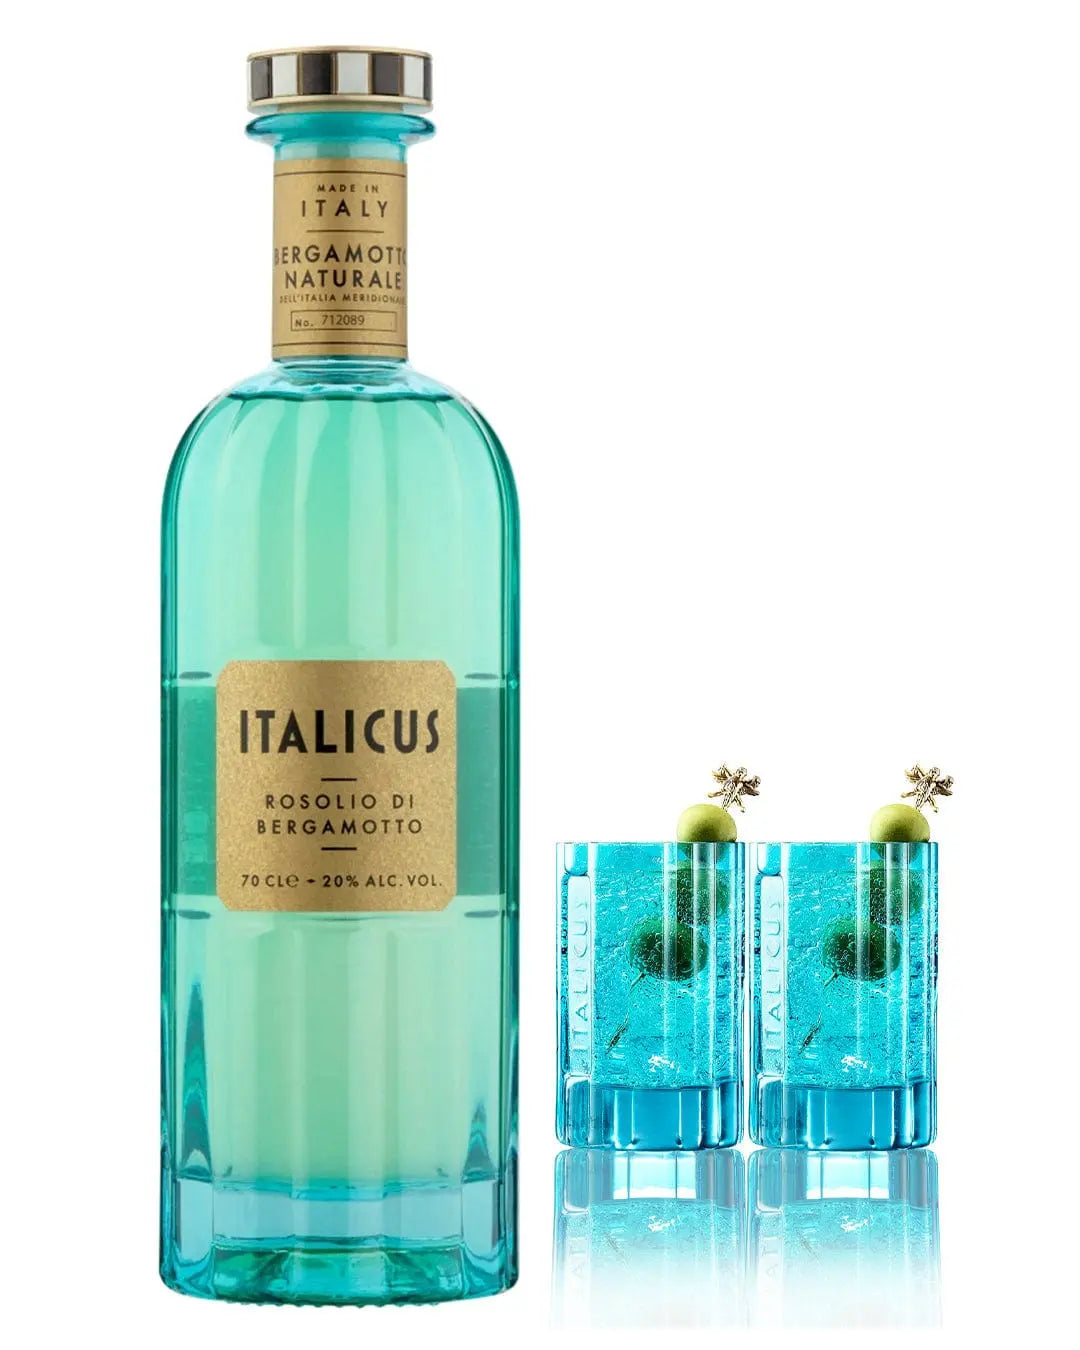 Italicus Rosolio di Bergamotto Liqueur with 2 Complimentary Glasses, 70 cl Liqueurs & Other Spirits